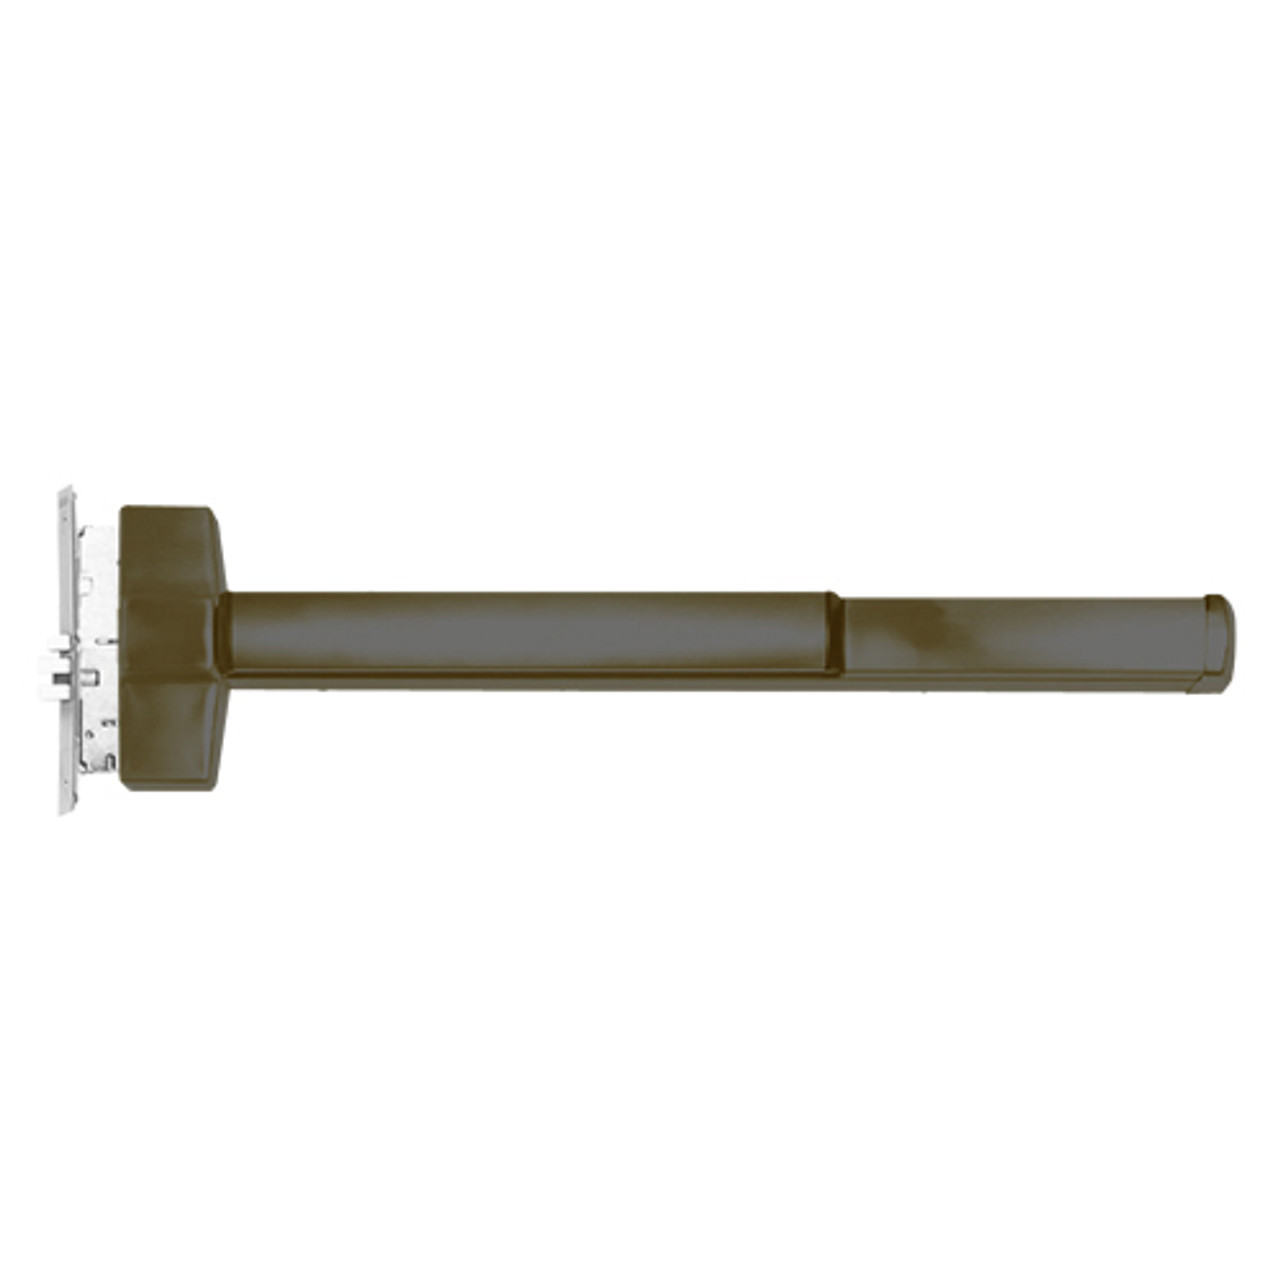 ED5657AL-613-MELR-M92-LHR Corbin ED5600 Series Fire Rated Mortise Exit Device with Motorized Latch Retraction and Touchbar Monitoring in Oil Rubbed Bronze Finish